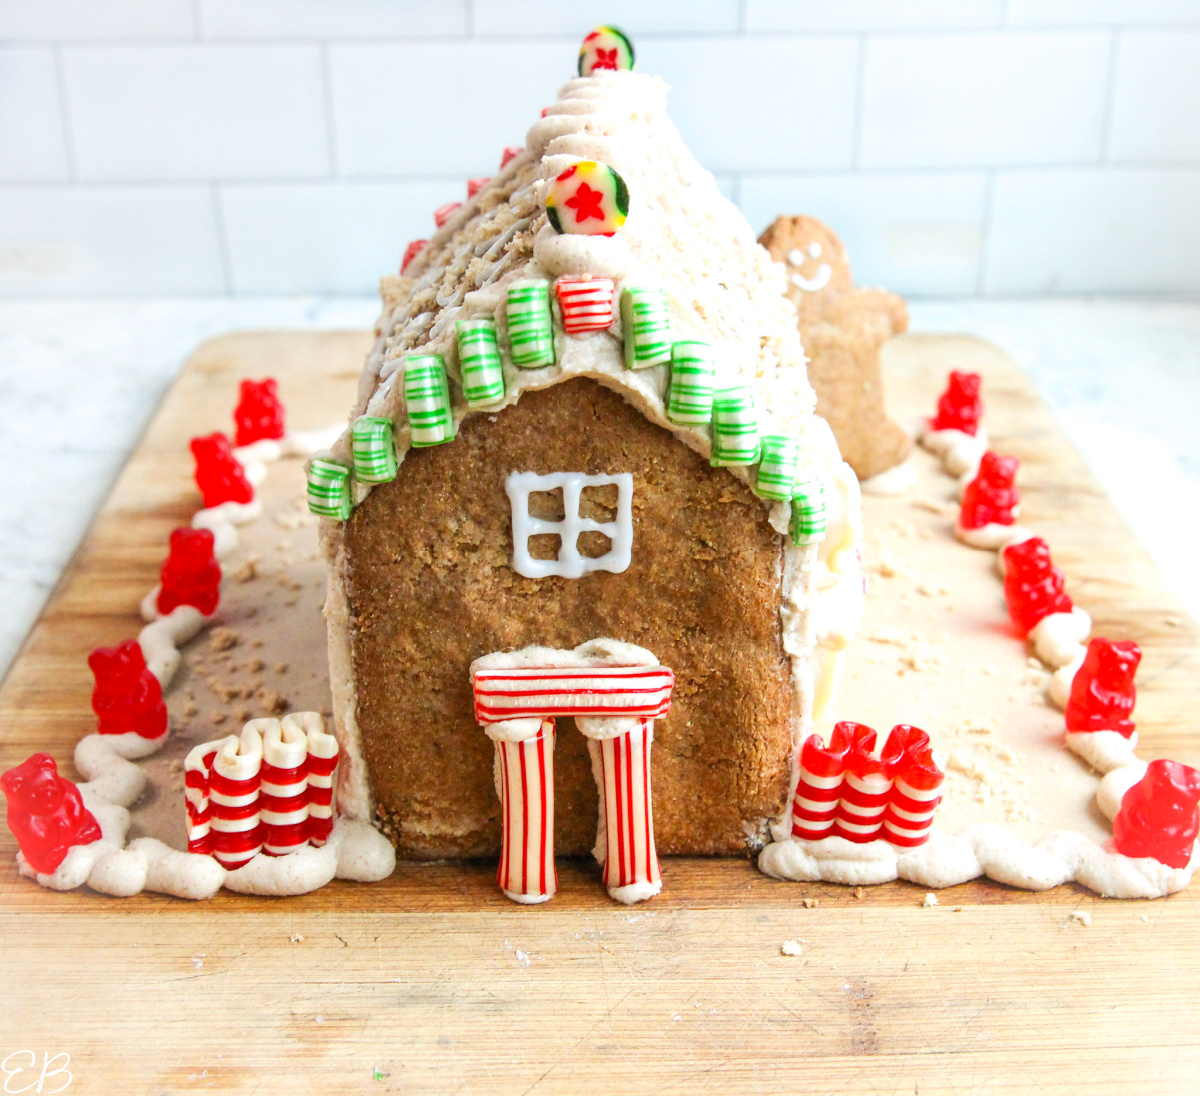 aip gingerbread house by a sunny window